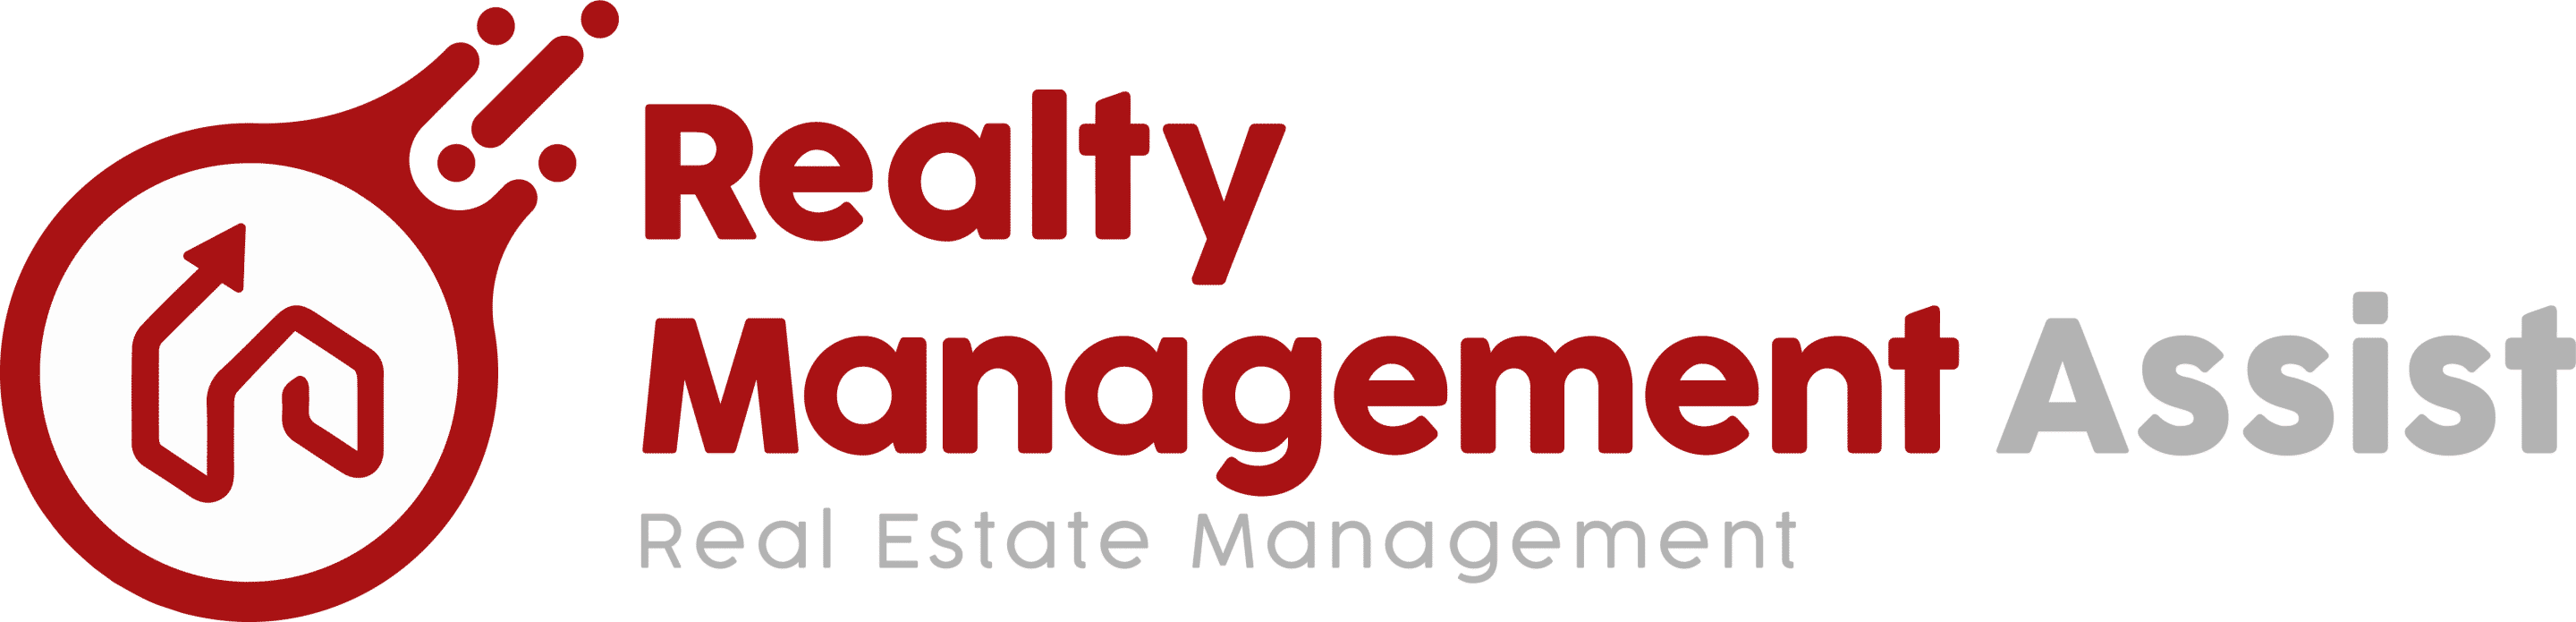 Realty Management and Recovery Assist